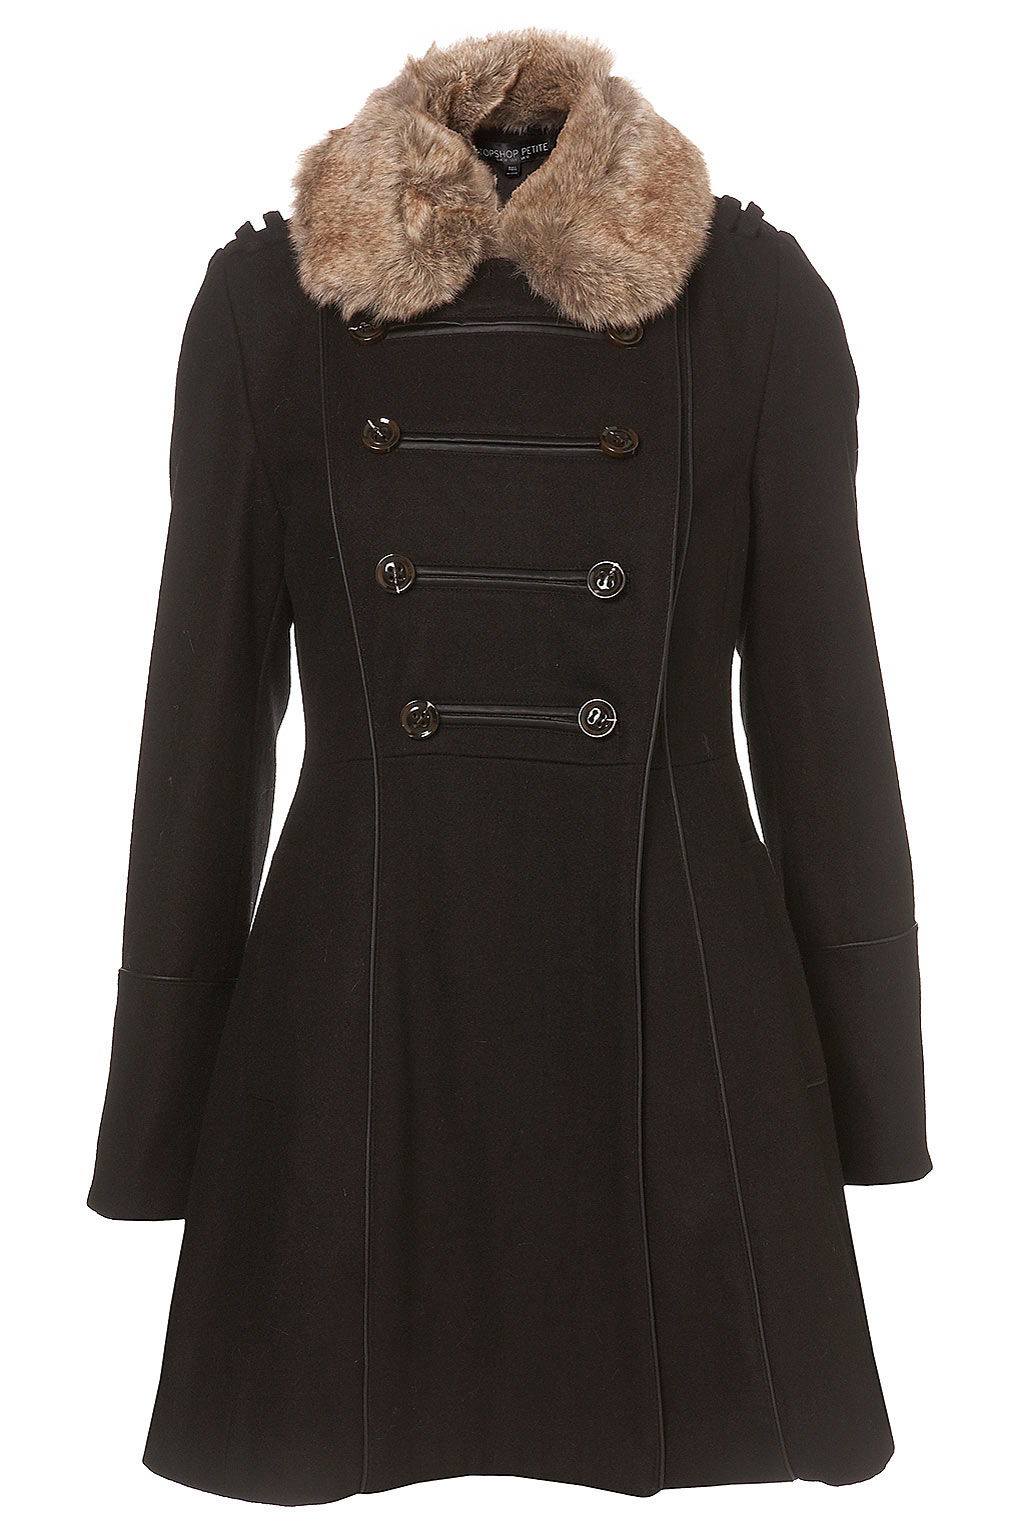 Wearable Trends: Petite Faux Fur Collar Double Breasted Piped Coat